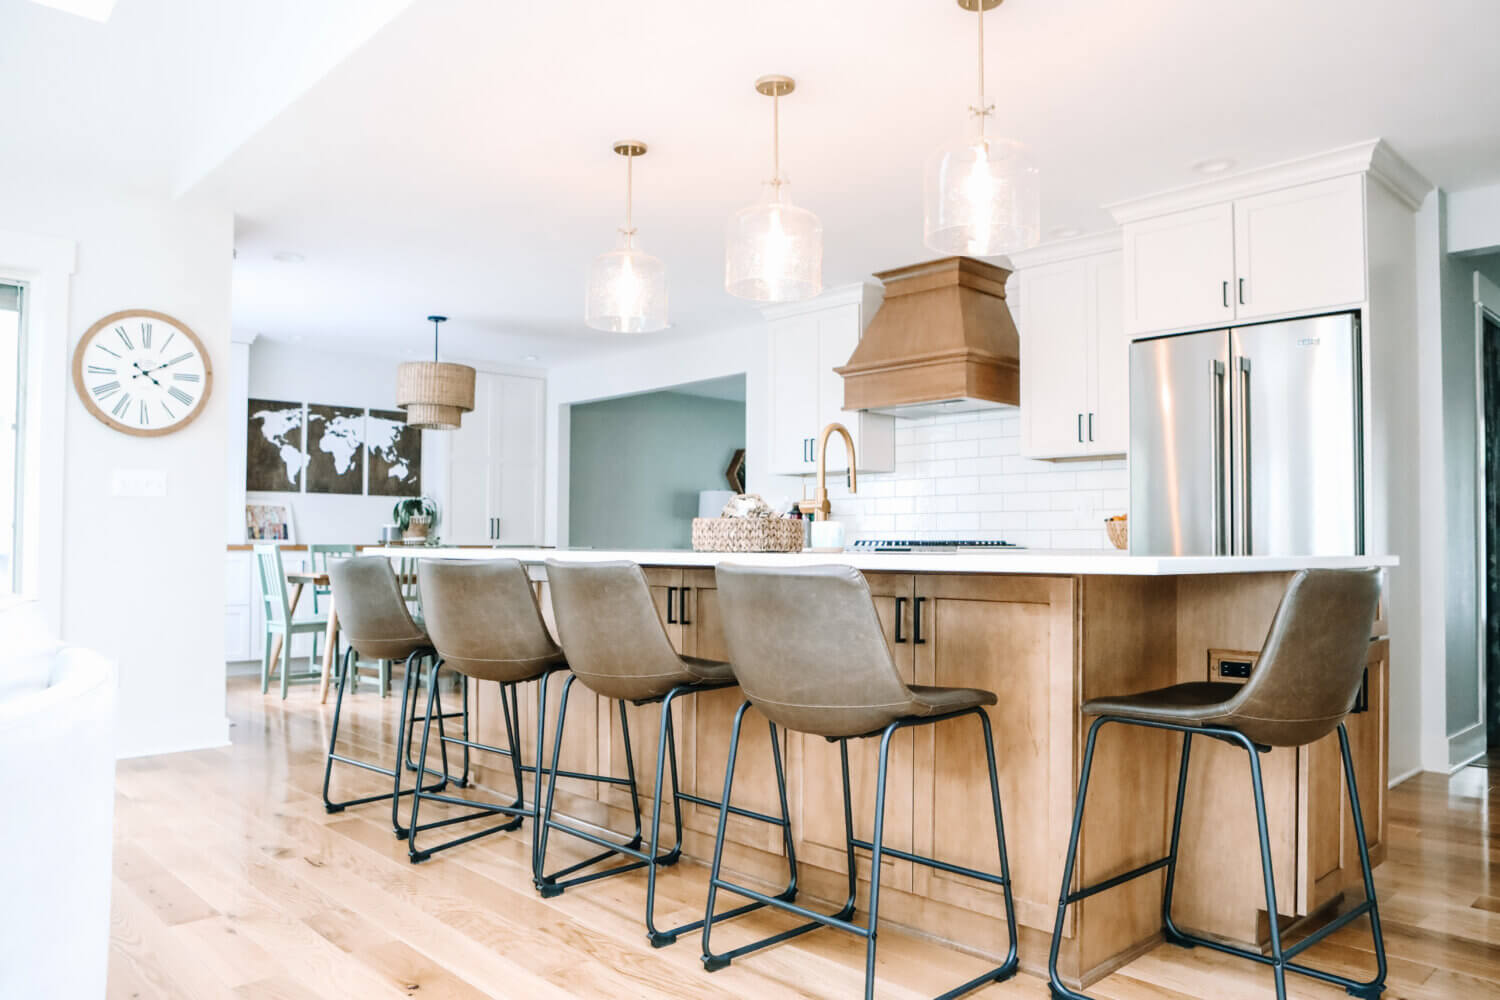 An angled view of the kitchen in an open floor plan with a light stained wood kitchen island and wood hood contrasted by white painted cabinets with shaker doors.